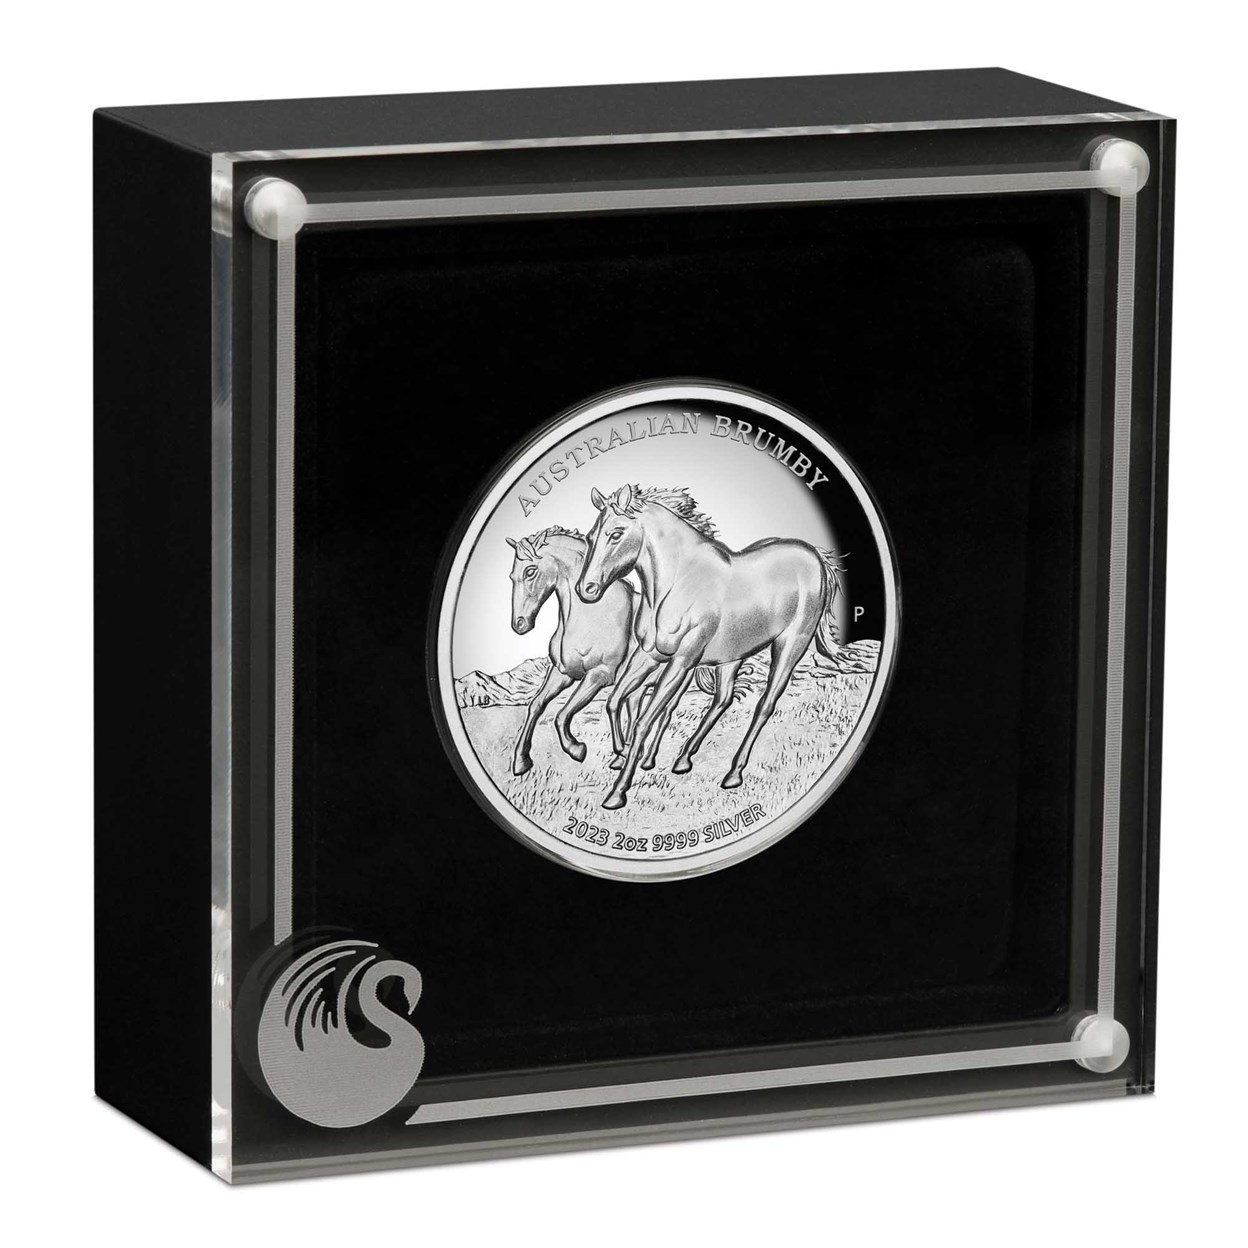 04 2023 AustralianBrumby 2oz Silver Proof HighRelief Coin InCase HighRes